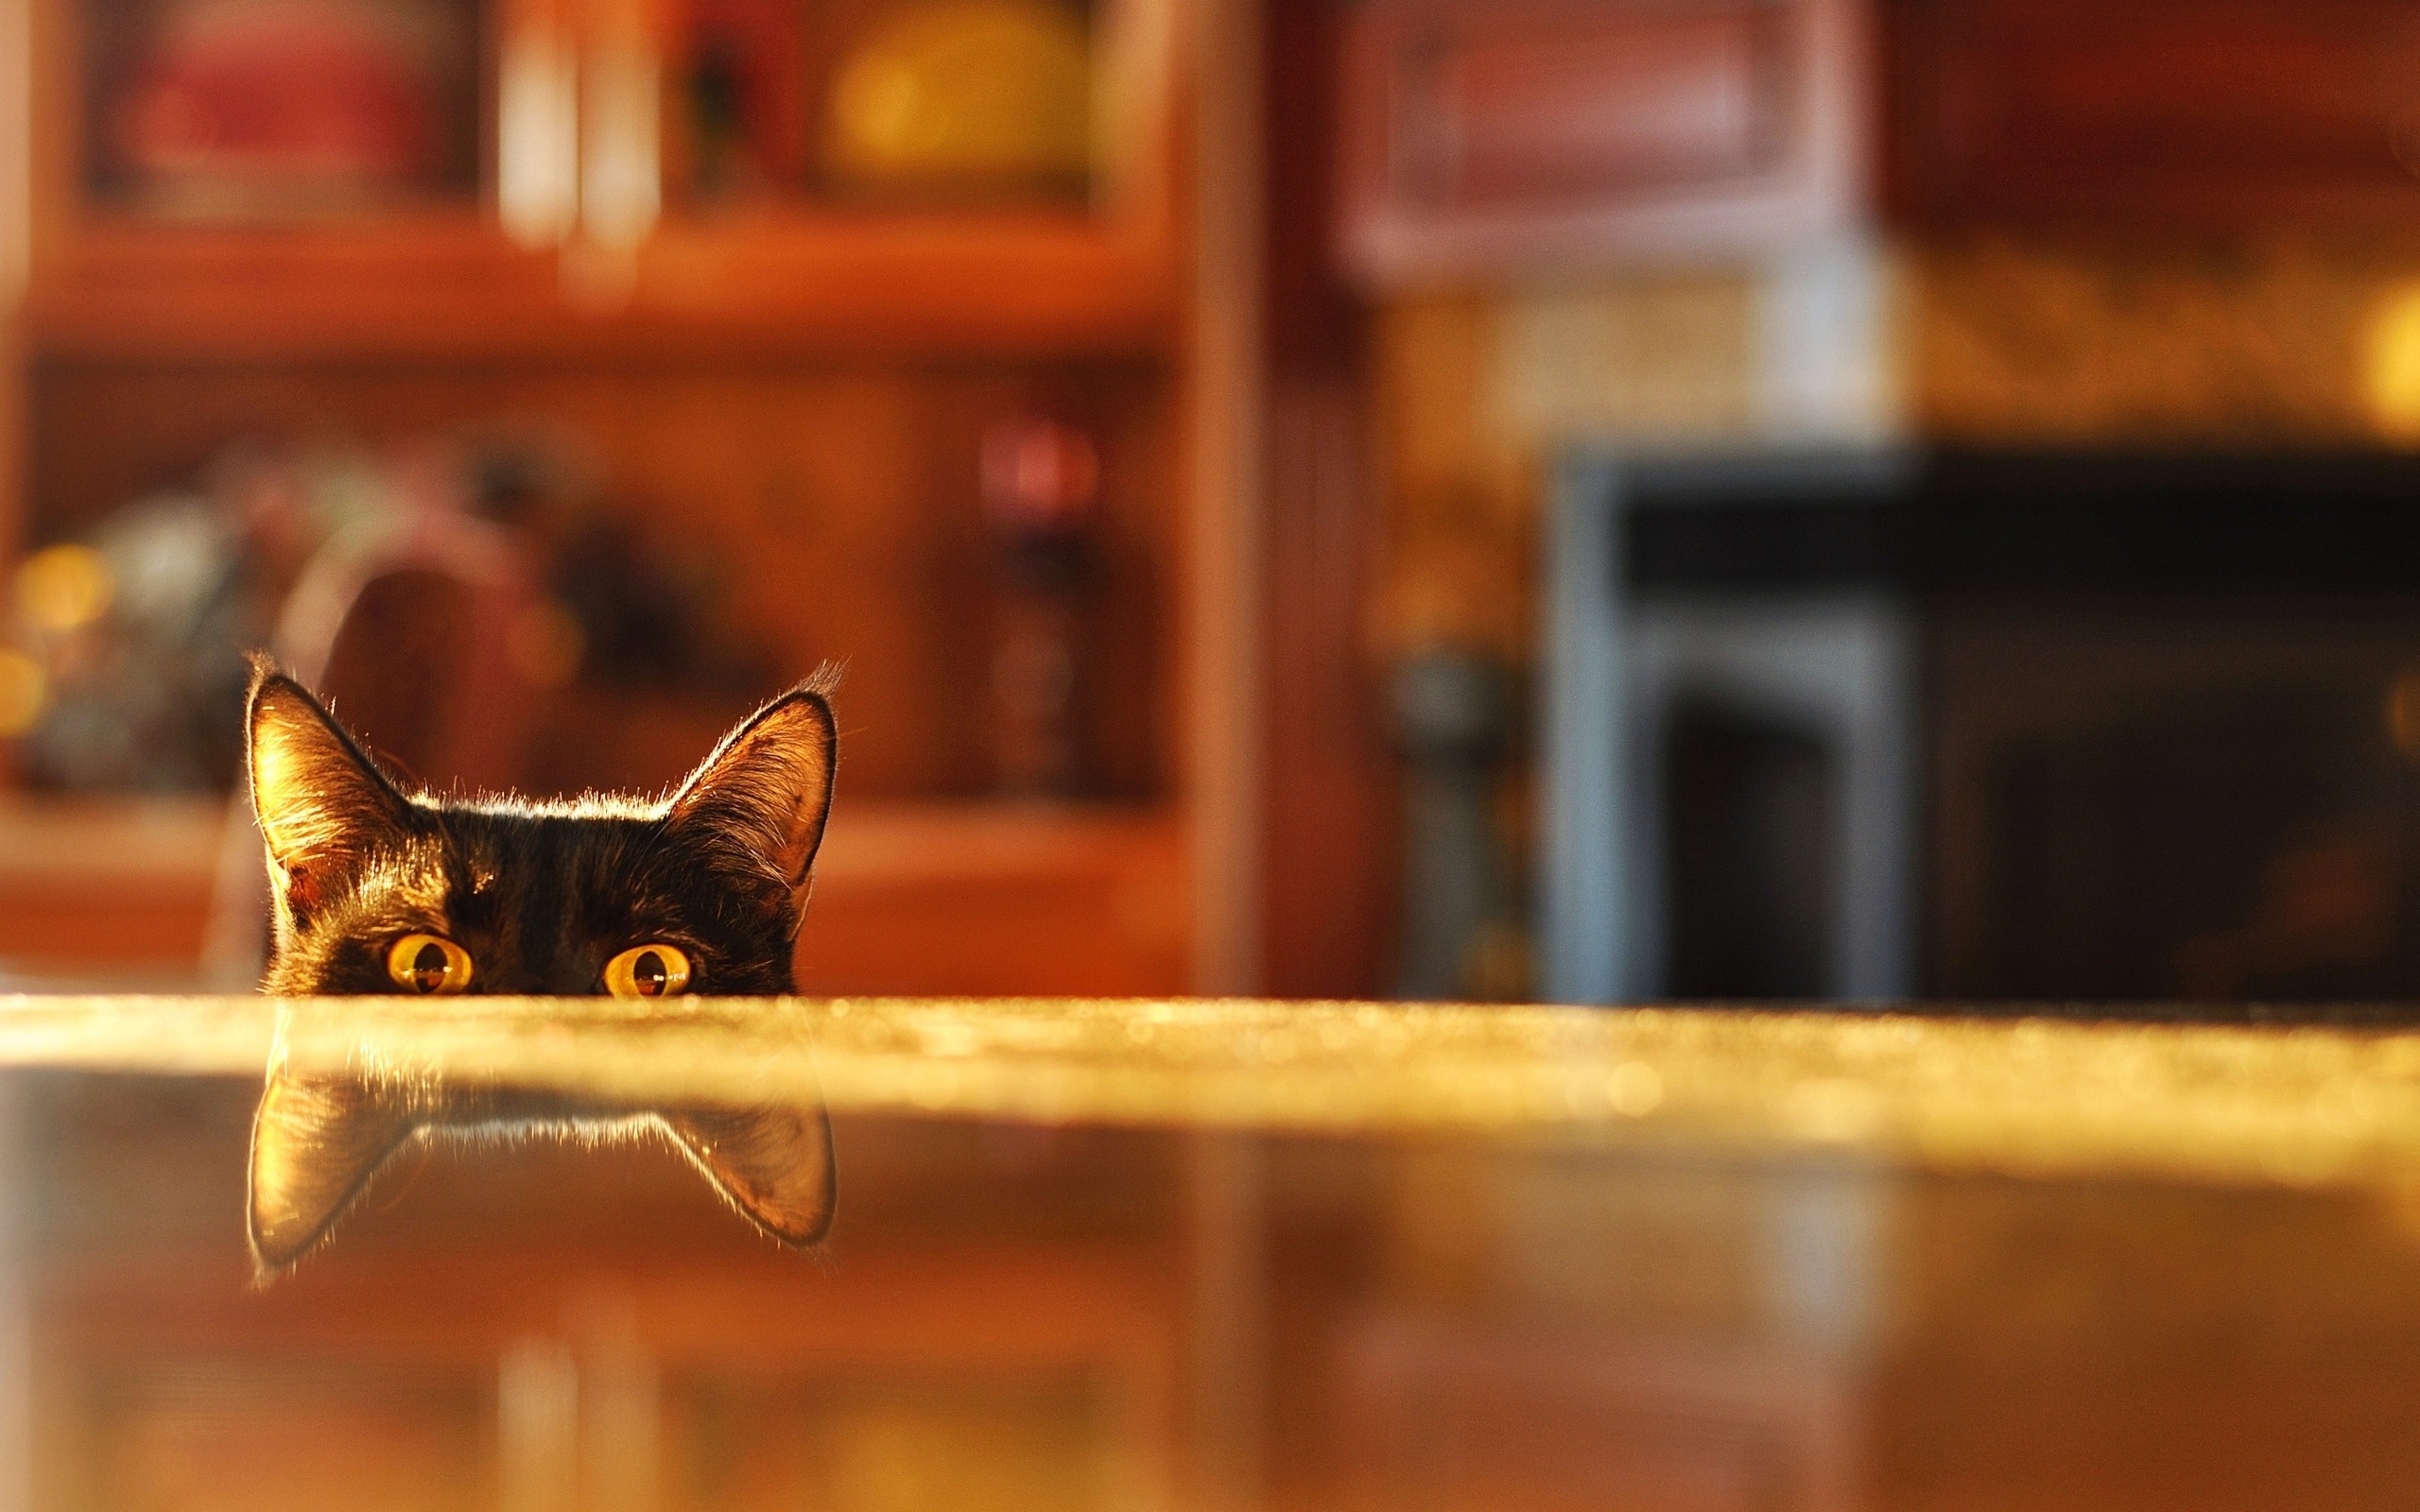 General 2560x1600 cats reflection blurred animals mammals animal eyes yellow eyes indoors